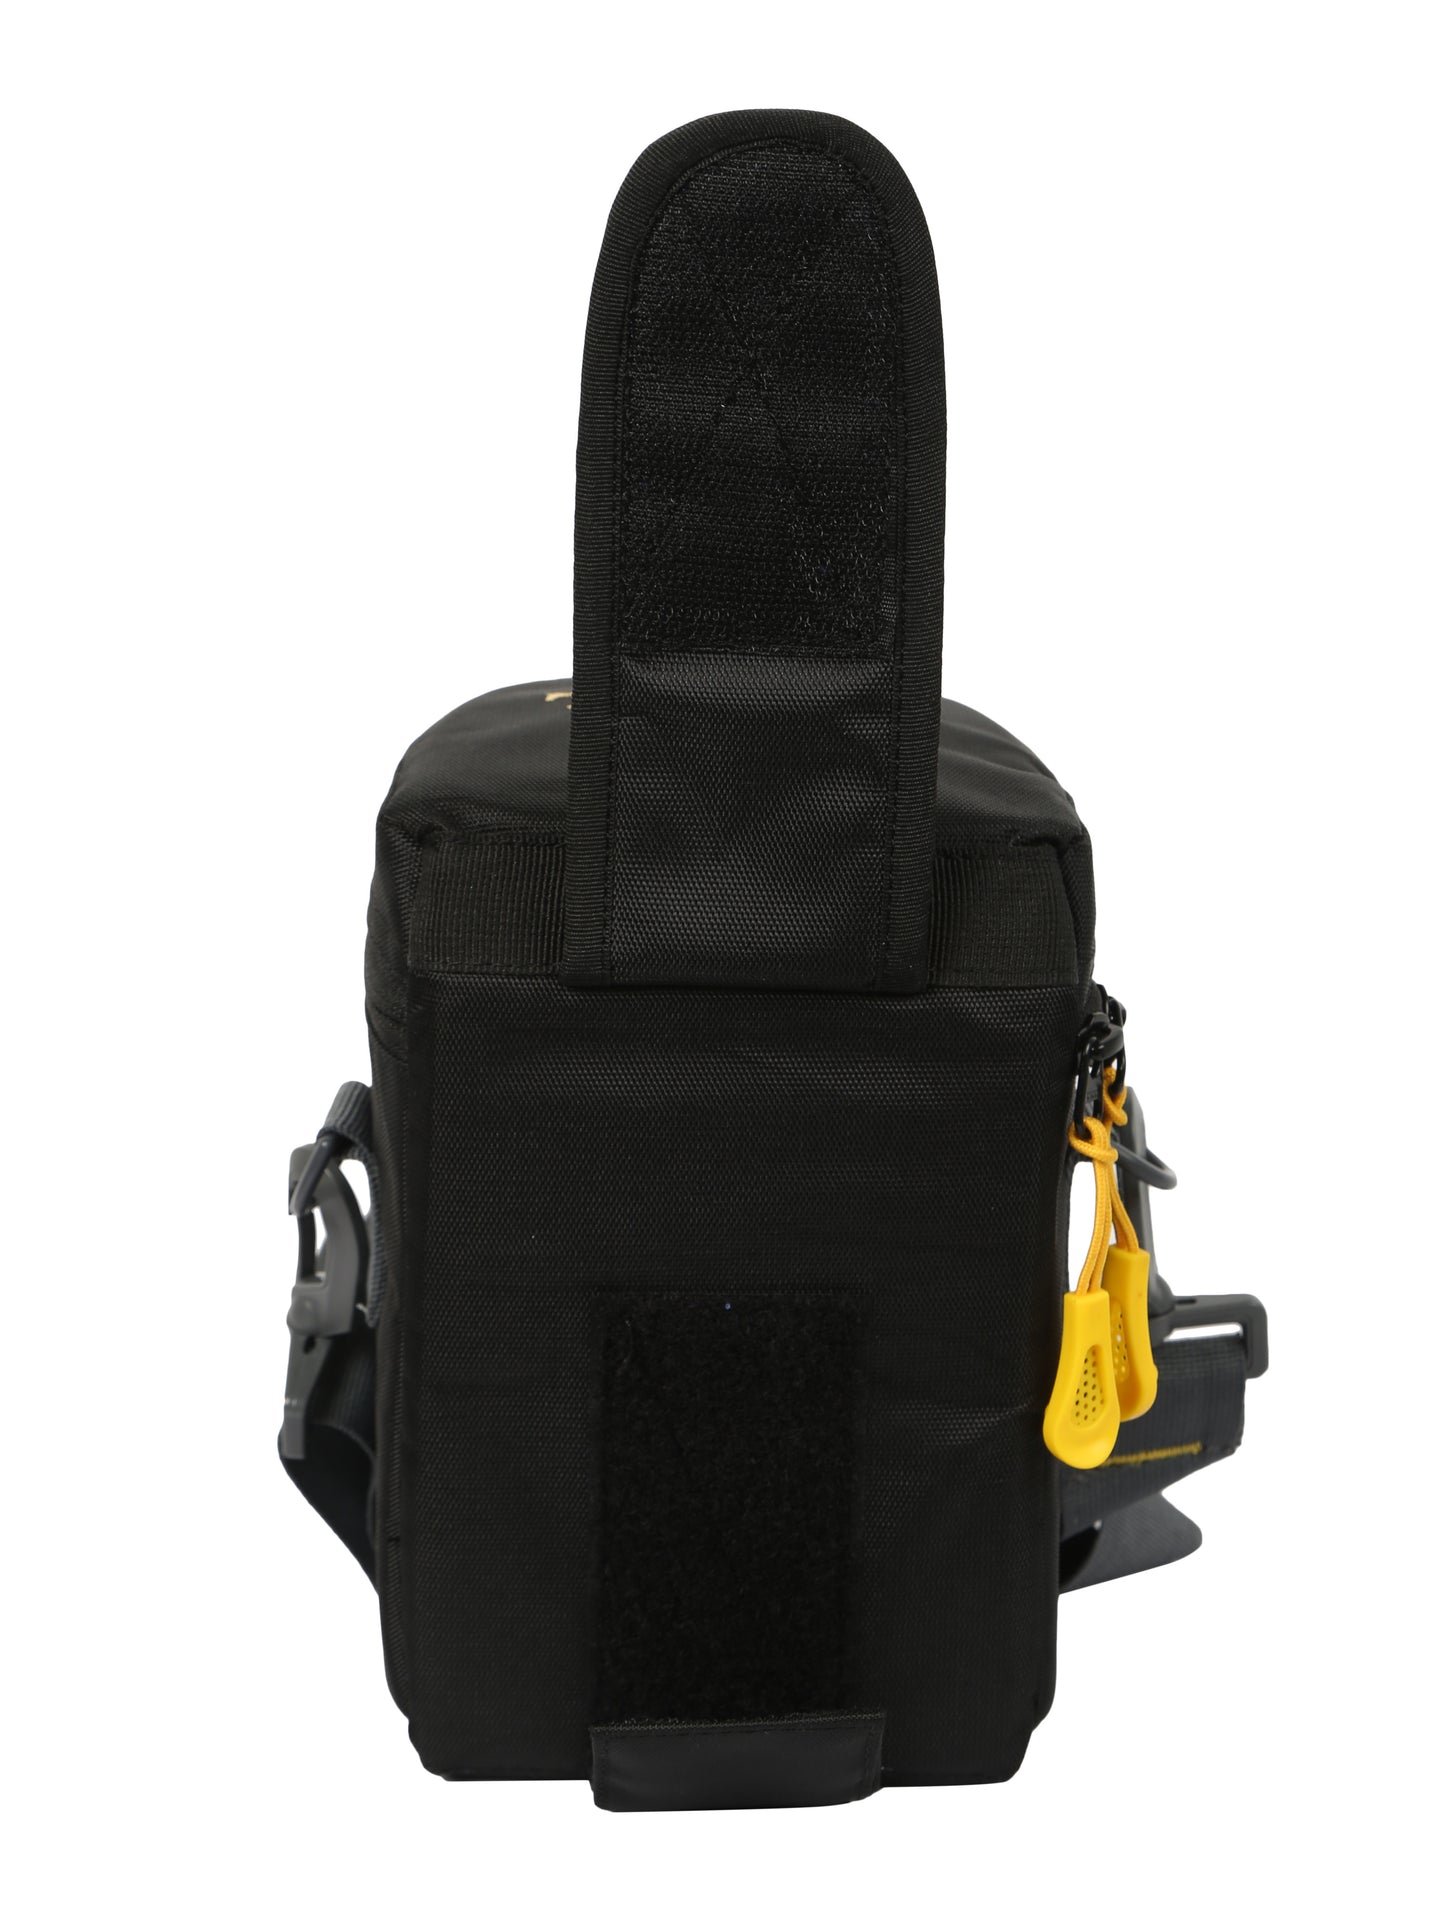 "Image: Back view of the P63 Lens Pack 2, showcasing the waist strap that can be attached to a belt for secure and comfortable wear. The bag also features a sling that can be worn around the neck for easy access to the lens. Enjoy versatile carrying options and keep your lens within reach with the P63 Lens Pack 2."